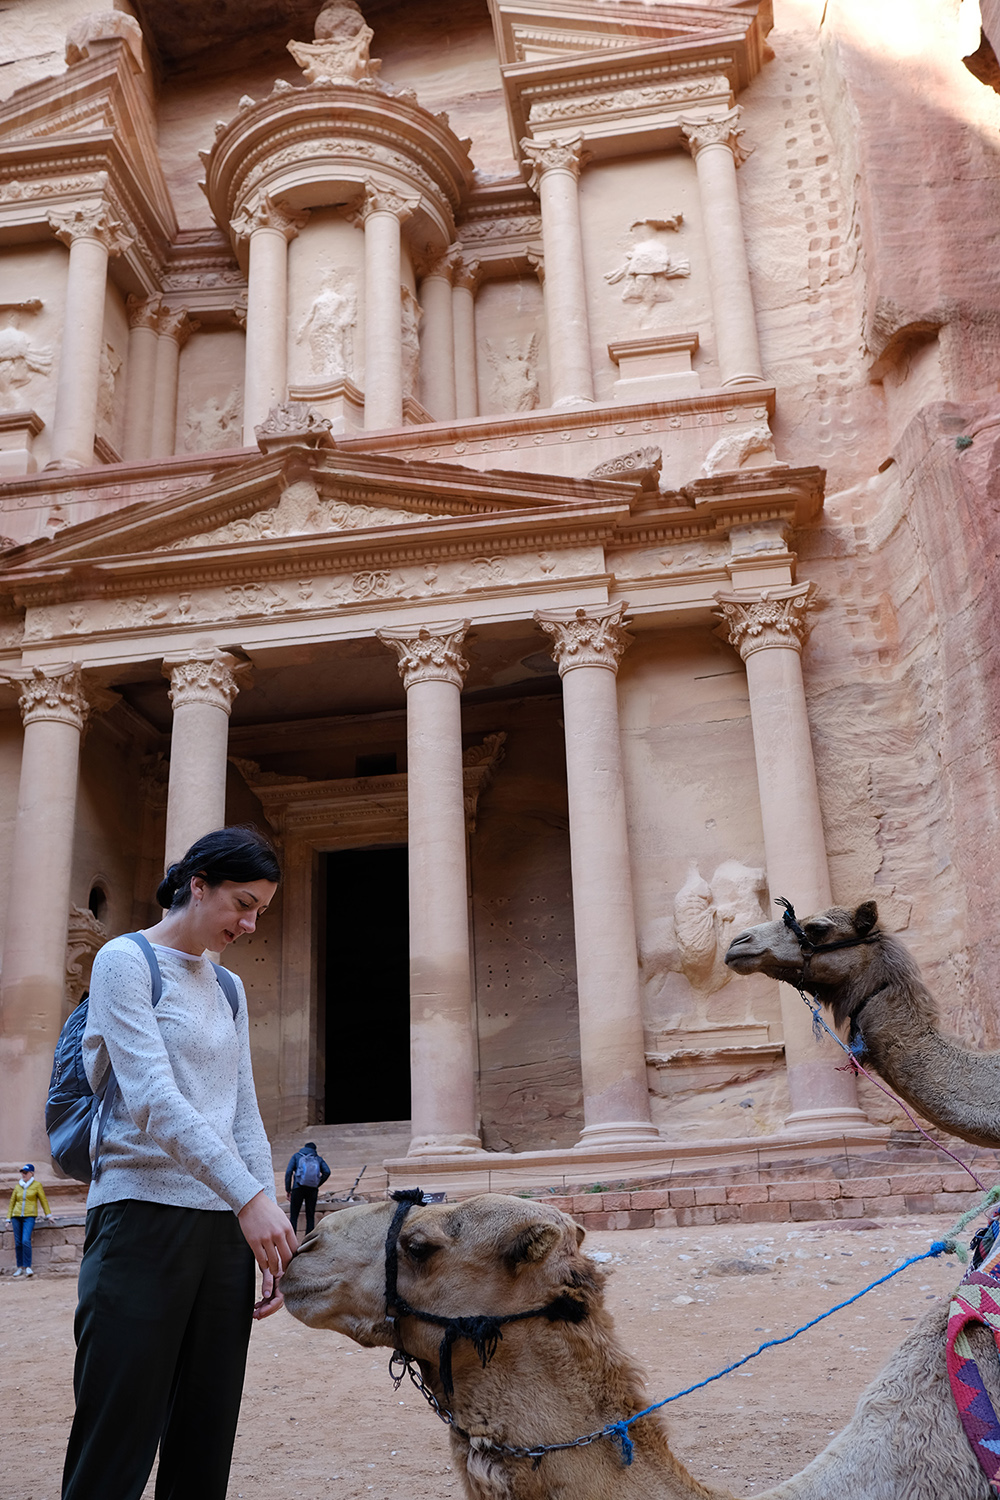  Al-Khazneh, or the Treasury, is a 2000-year-old temple/tomb cut into the sandstone cliffs in Petra. Camels are pretty neat too. 